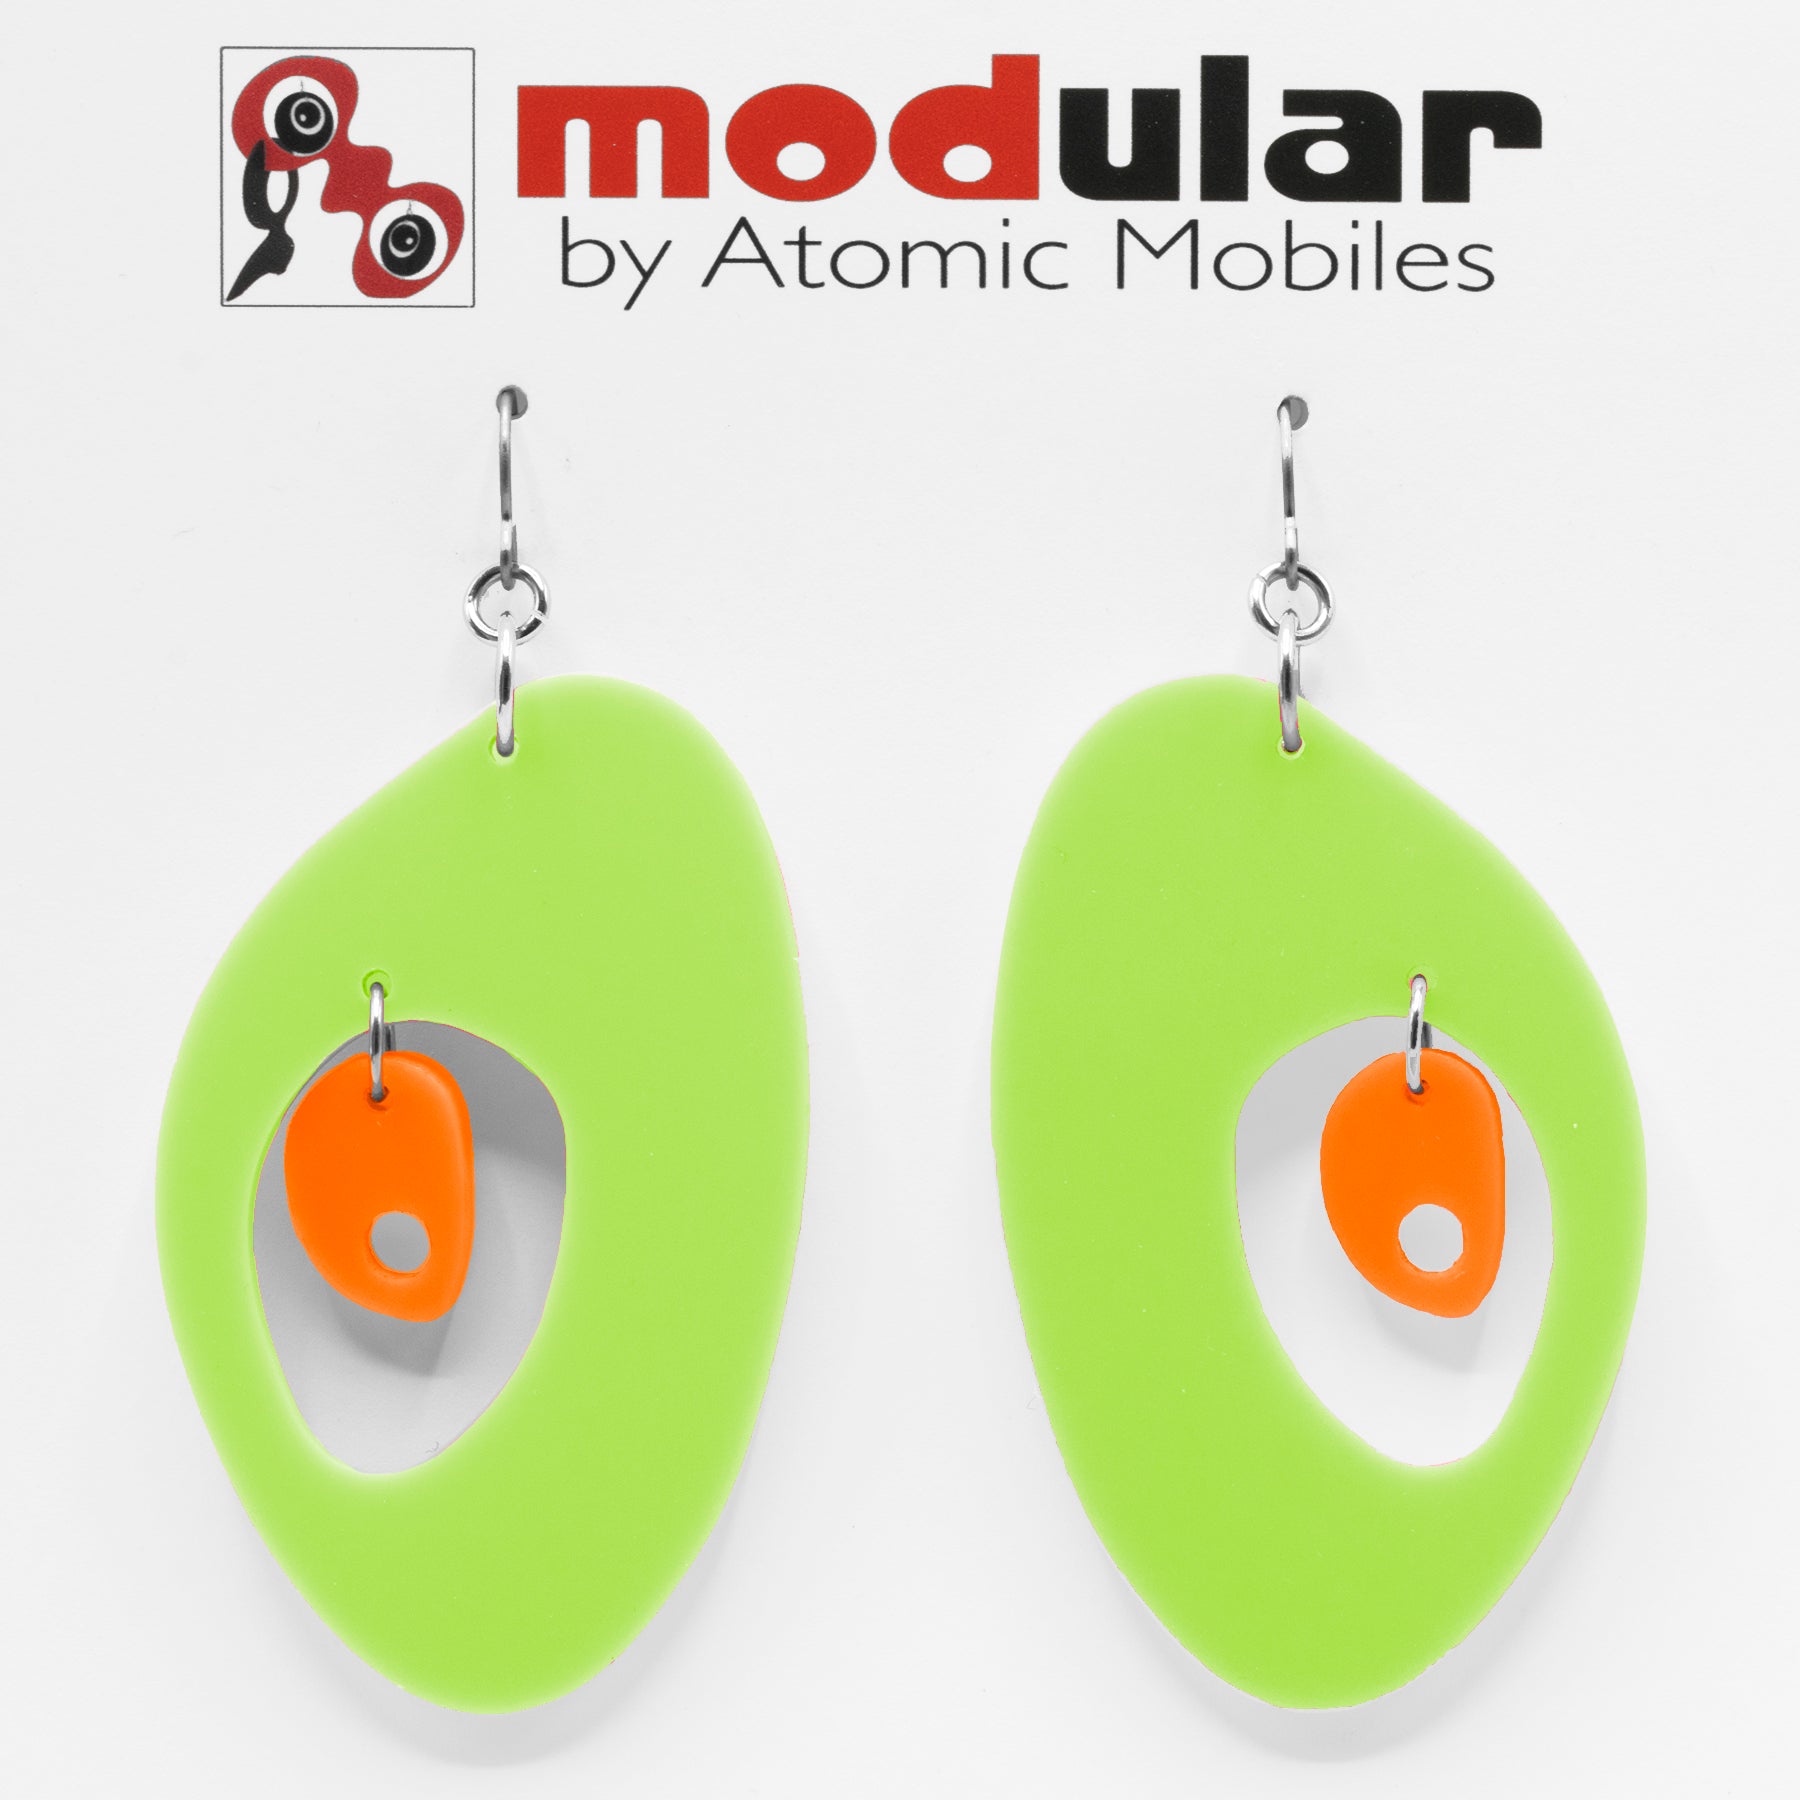 MODular Earrings - The Modernist Statement Earrings in Lime and Orange by AtomicMobiles.com - retro era inspired mod handmade jewelry